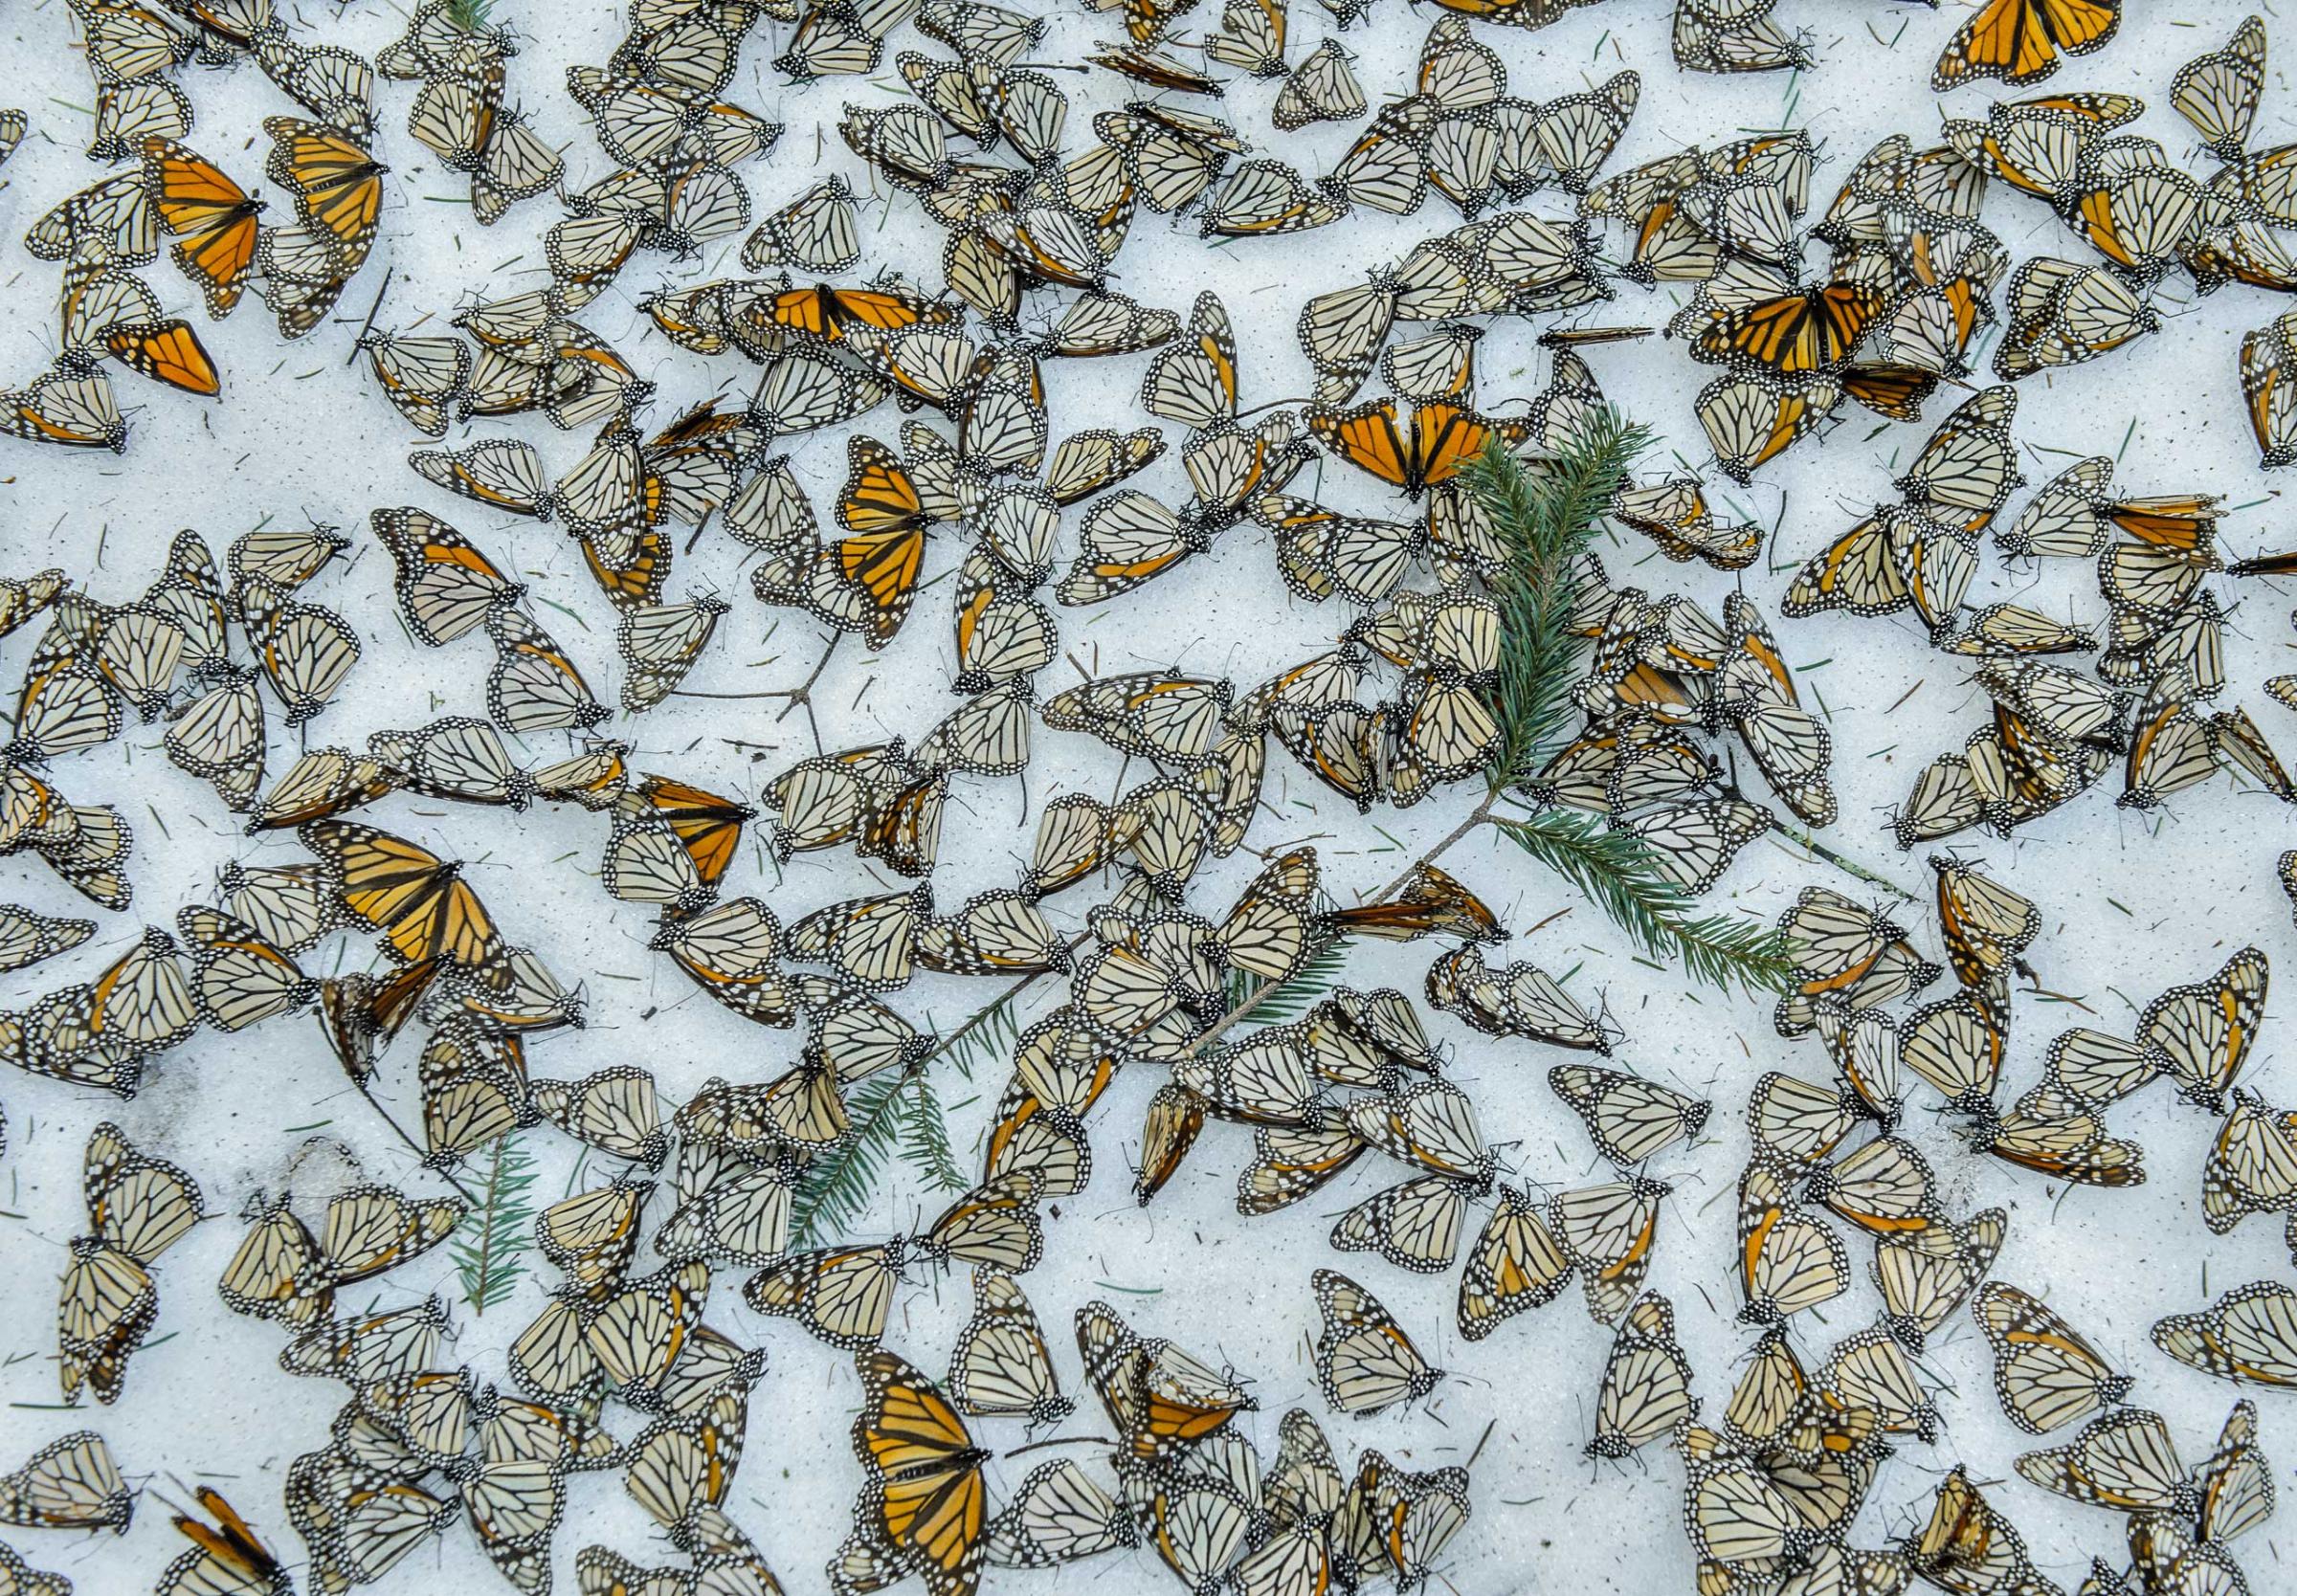 A carpet of Monarch Butterflies covers the forest floor of El Rosario Butterfly Sanctuary after a snow storm that hit the state of Michoacán in Mexico on March 2015.On March 8th and 9th of 2016 a strong snow storm hit the mountains of Central Mexico creating havoc in the wintering colonies of Monarch Butterflies just when they were starting their migration back to U.S.A. and Canada.Monarch butterflies are surprisingly resilient and they can survive several days in below zero temperatures as long as they remain dry. Deforestation reduces the shelter for the butterflies making them more vulnerable to the weather elements. And although illegal logging has been curbed thanks to the conservation efforts in Mexico, climate change is creating an increase of these unusual weather events which represent one of the biggest challenges for these insects during their hibernation period.